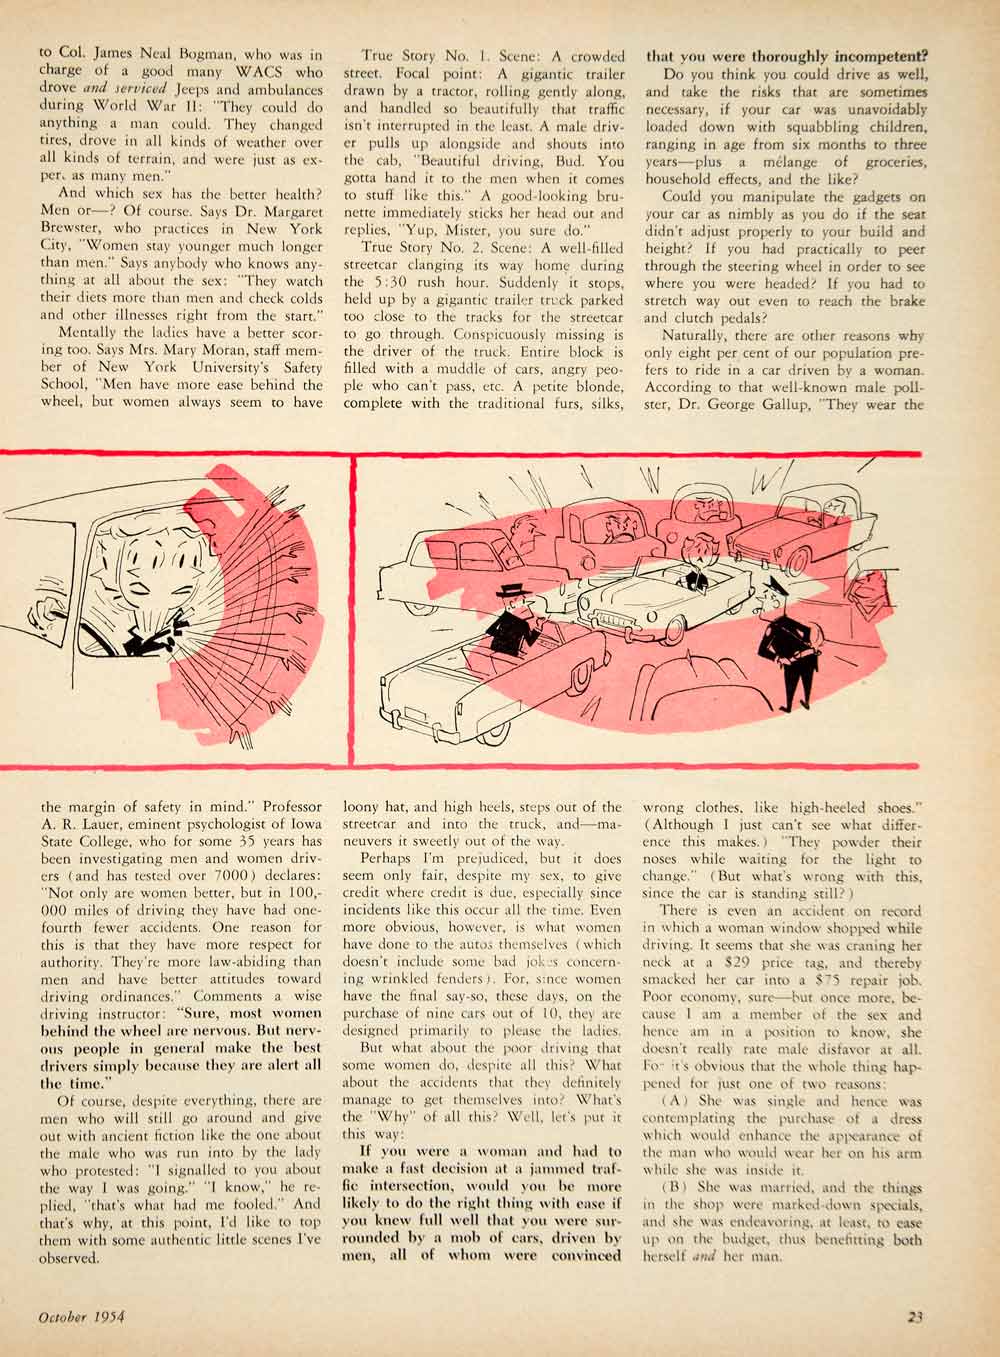 1954 Article Cartoon Women Drivers Car Automobile Lady Driving Auto Bess YMT1